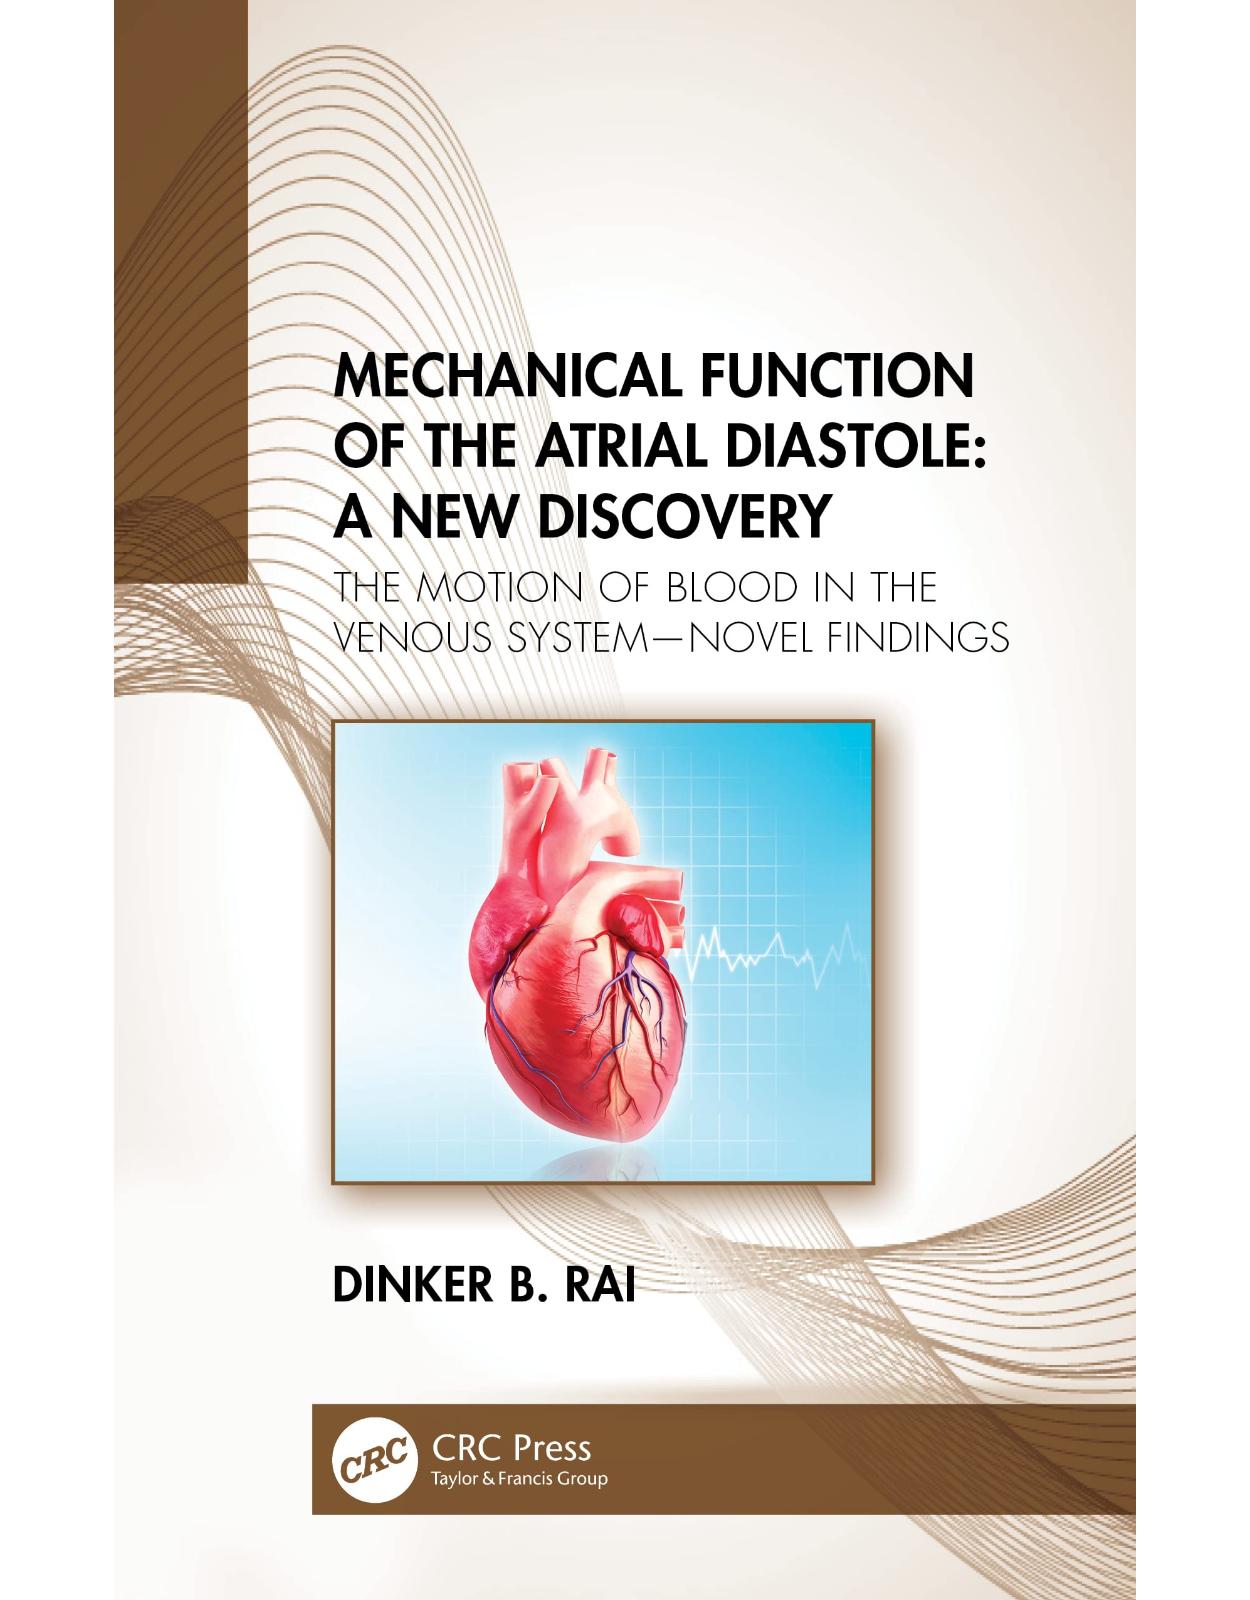 Mechanical Function of the Atrial Diastole: A New Discovery: The Motion of Blood in the Venous System